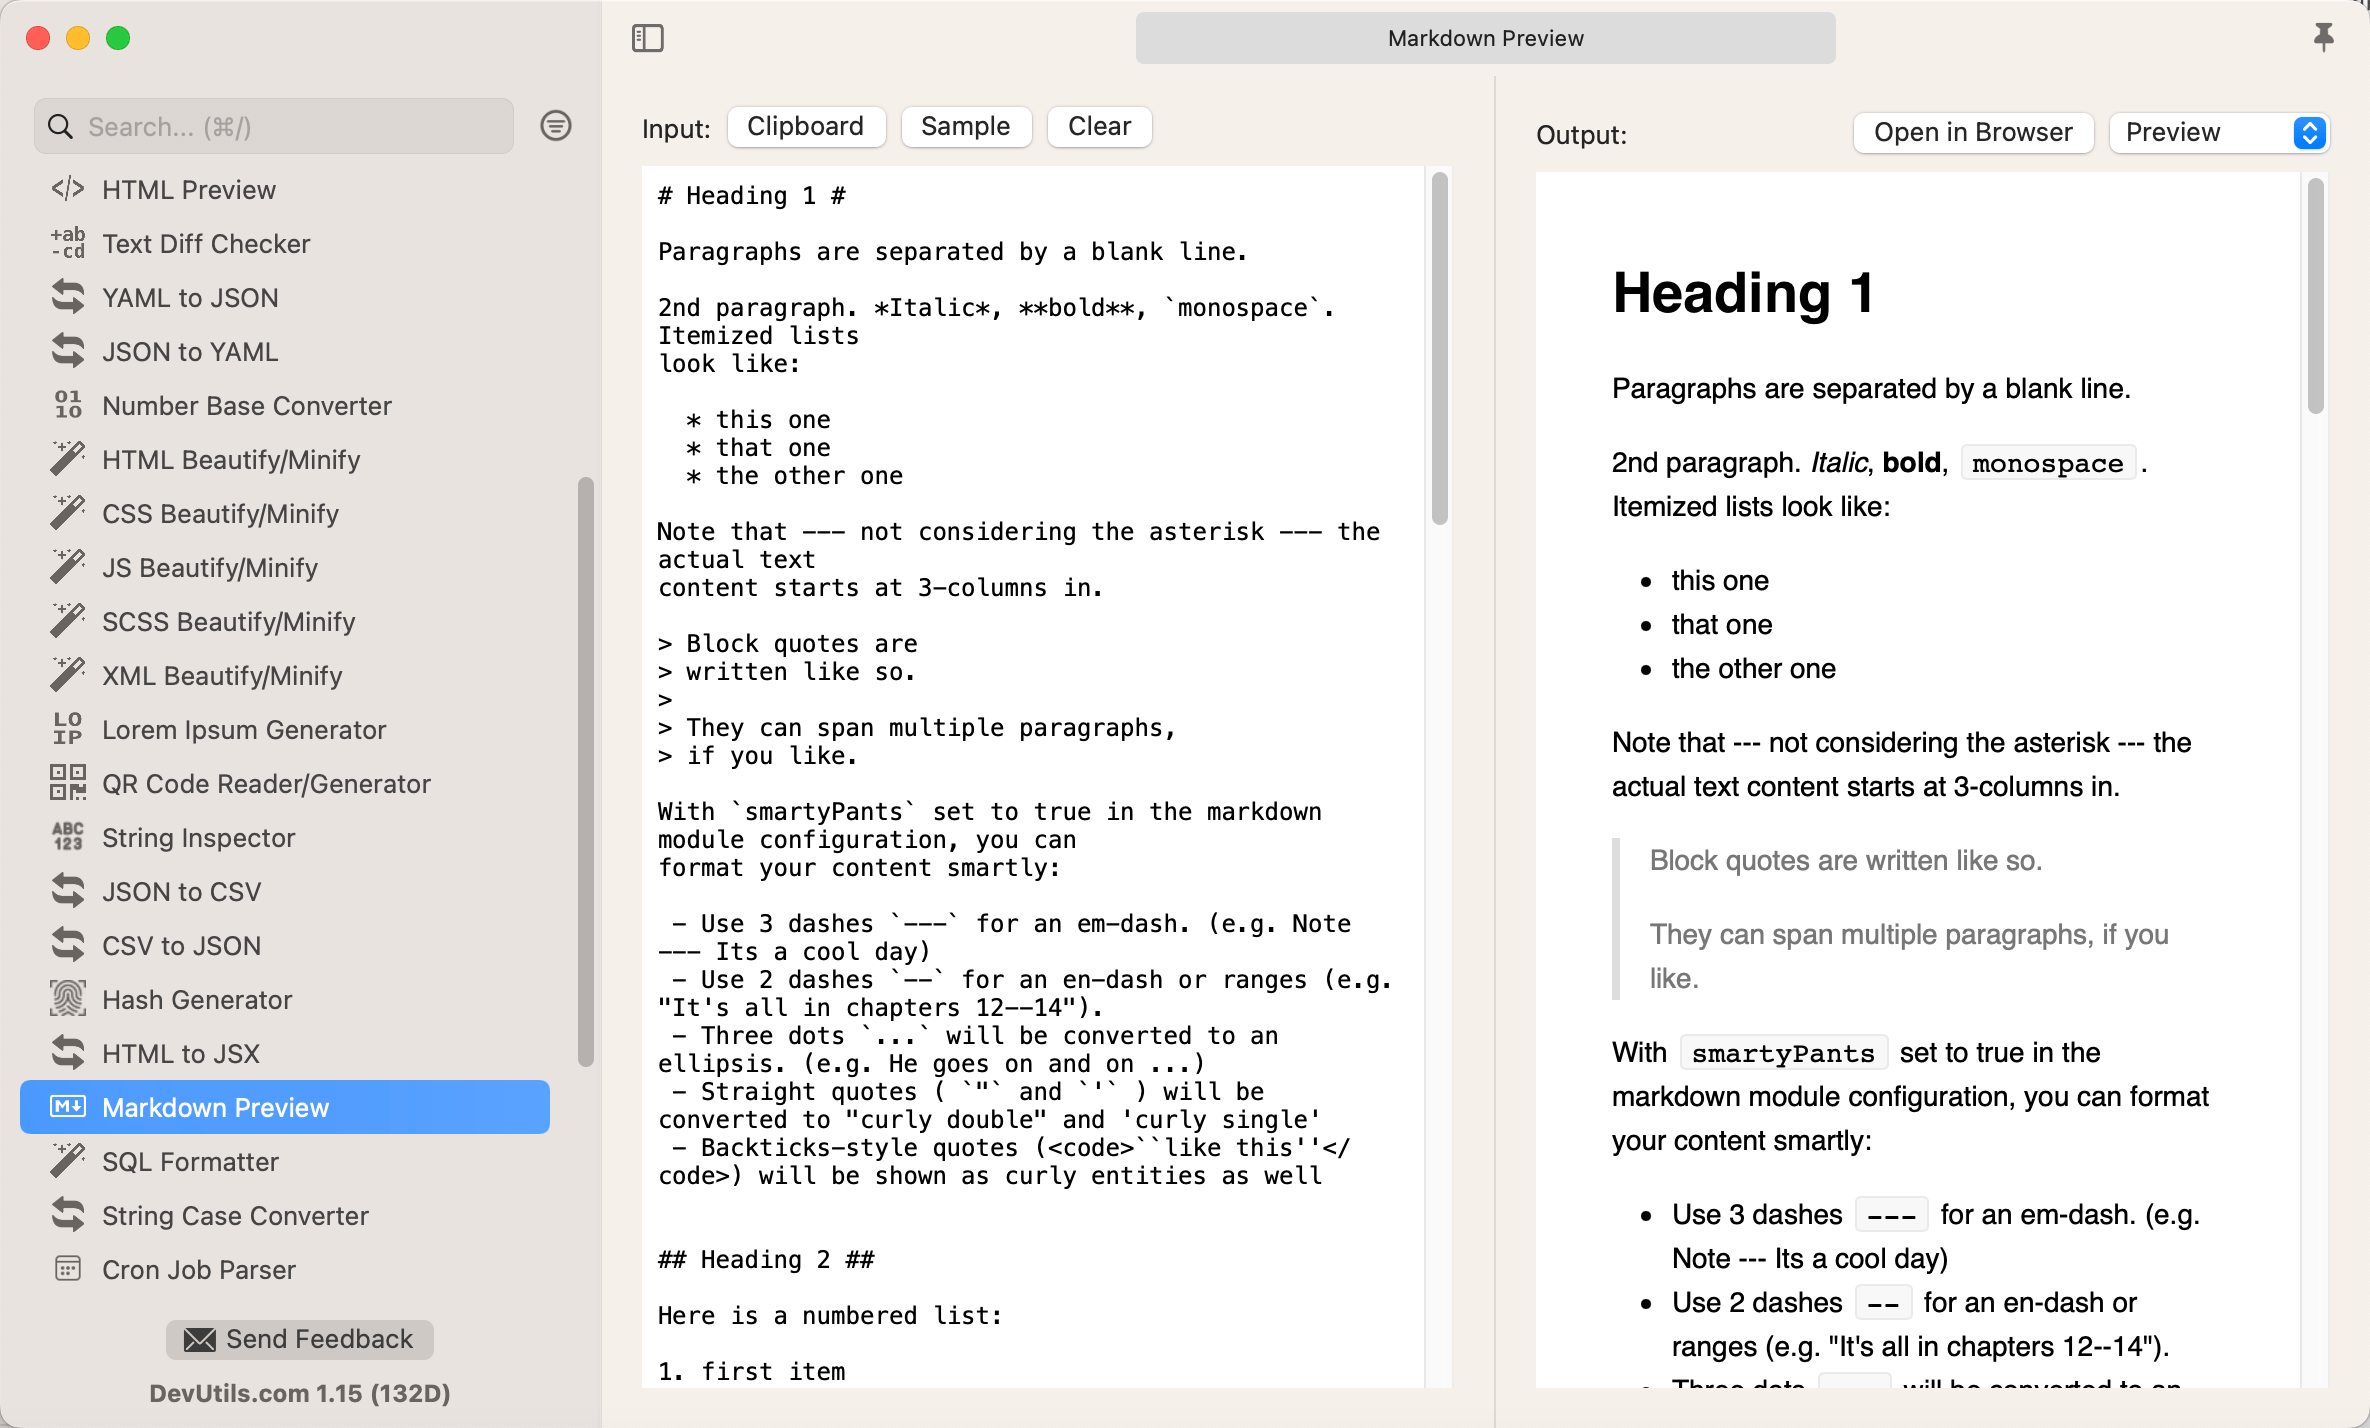 Markdown Preview macOS app